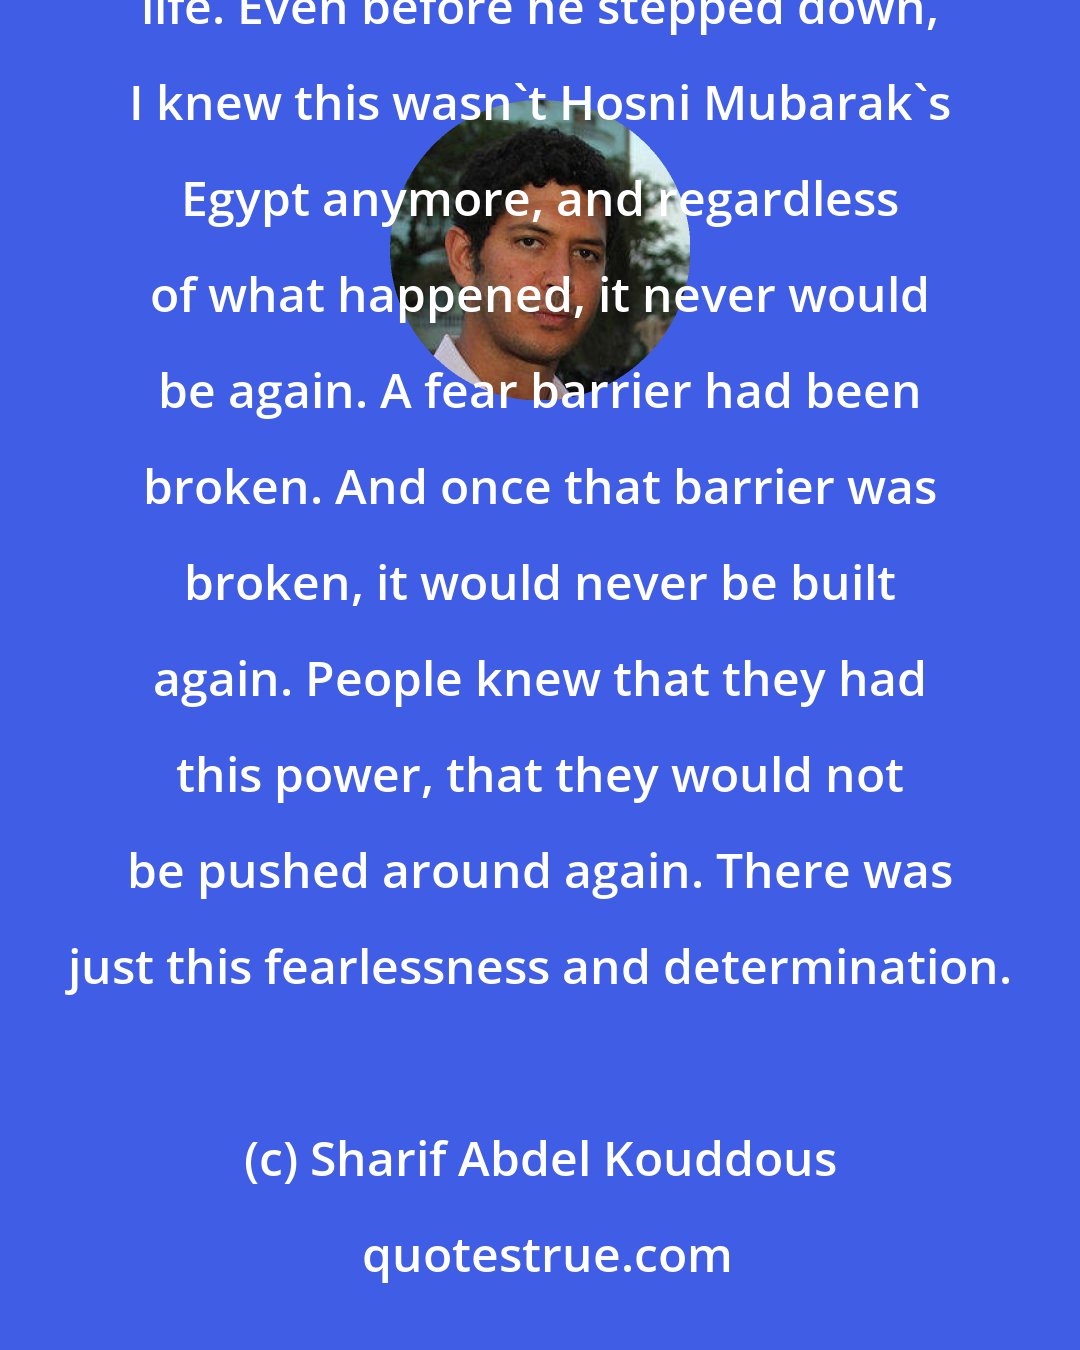 Sharif Abdel Kouddous: I was three years old when Hosni Mubarak came into power. I've lived under Hosni Mubarak nearly all my entire life. Even before he stepped down, I knew this wasn't Hosni Mubarak's Egypt anymore, and regardless of what happened, it never would be again. A fear barrier had been broken. And once that barrier was broken, it would never be built again. People knew that they had this power, that they would not be pushed around again. There was just this fearlessness and determination.